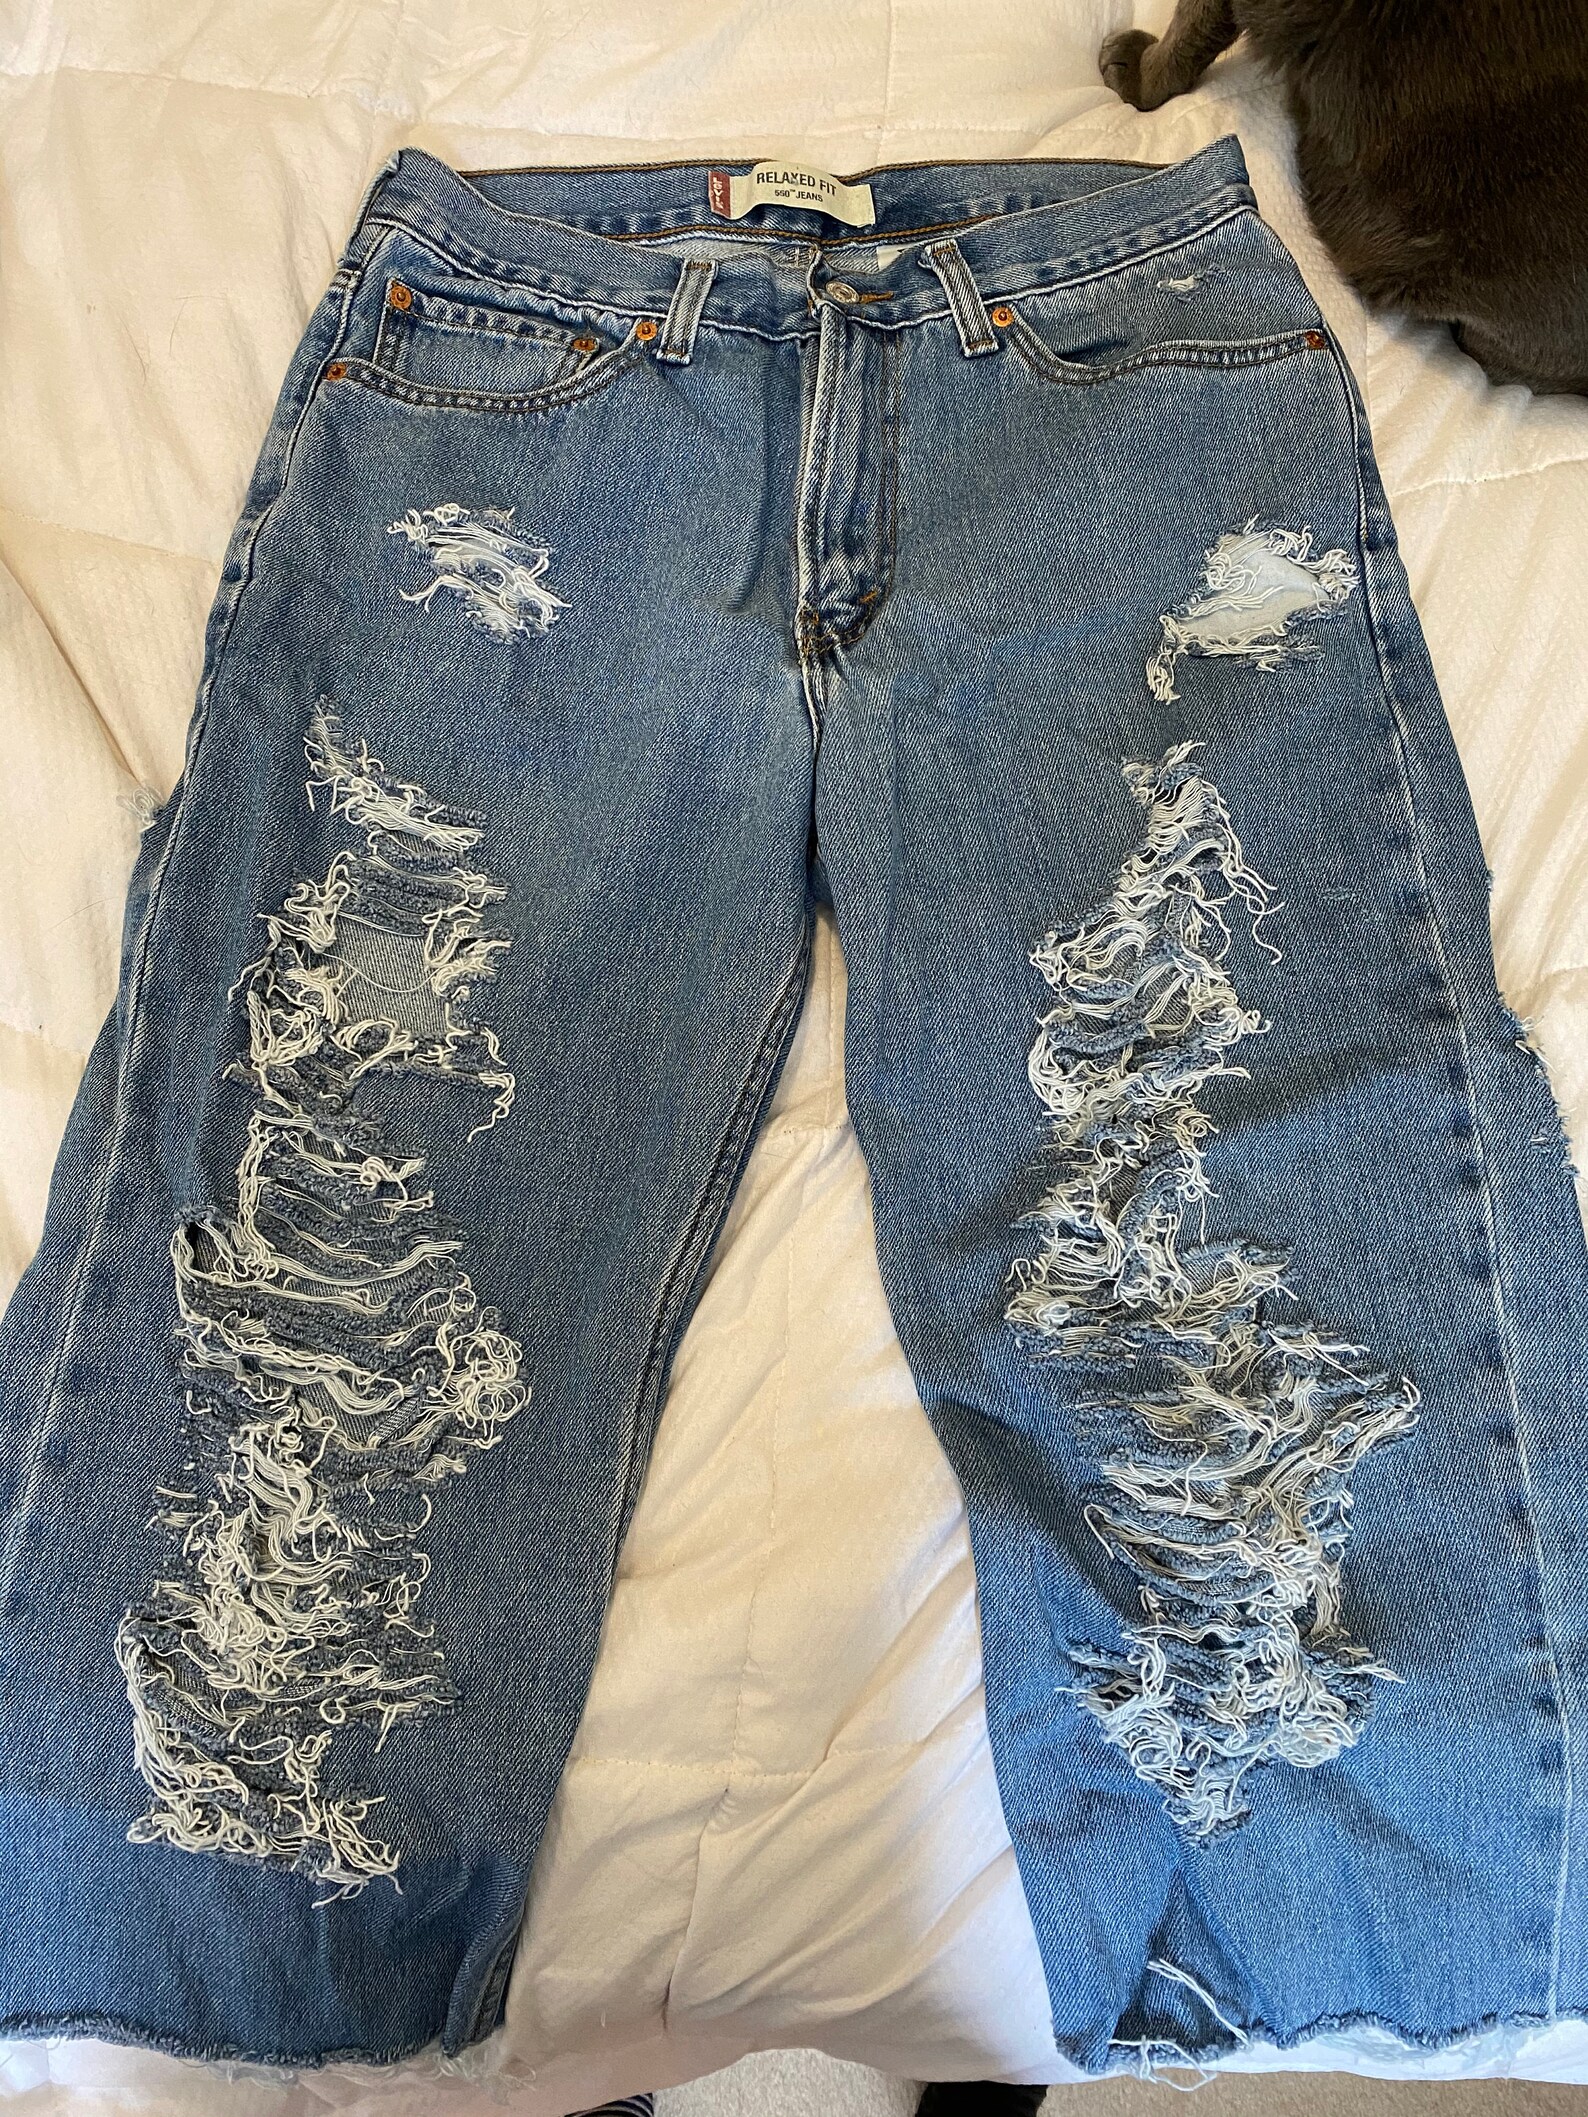 Distressed Levis jeans mom jeans dad jeans | Etsy